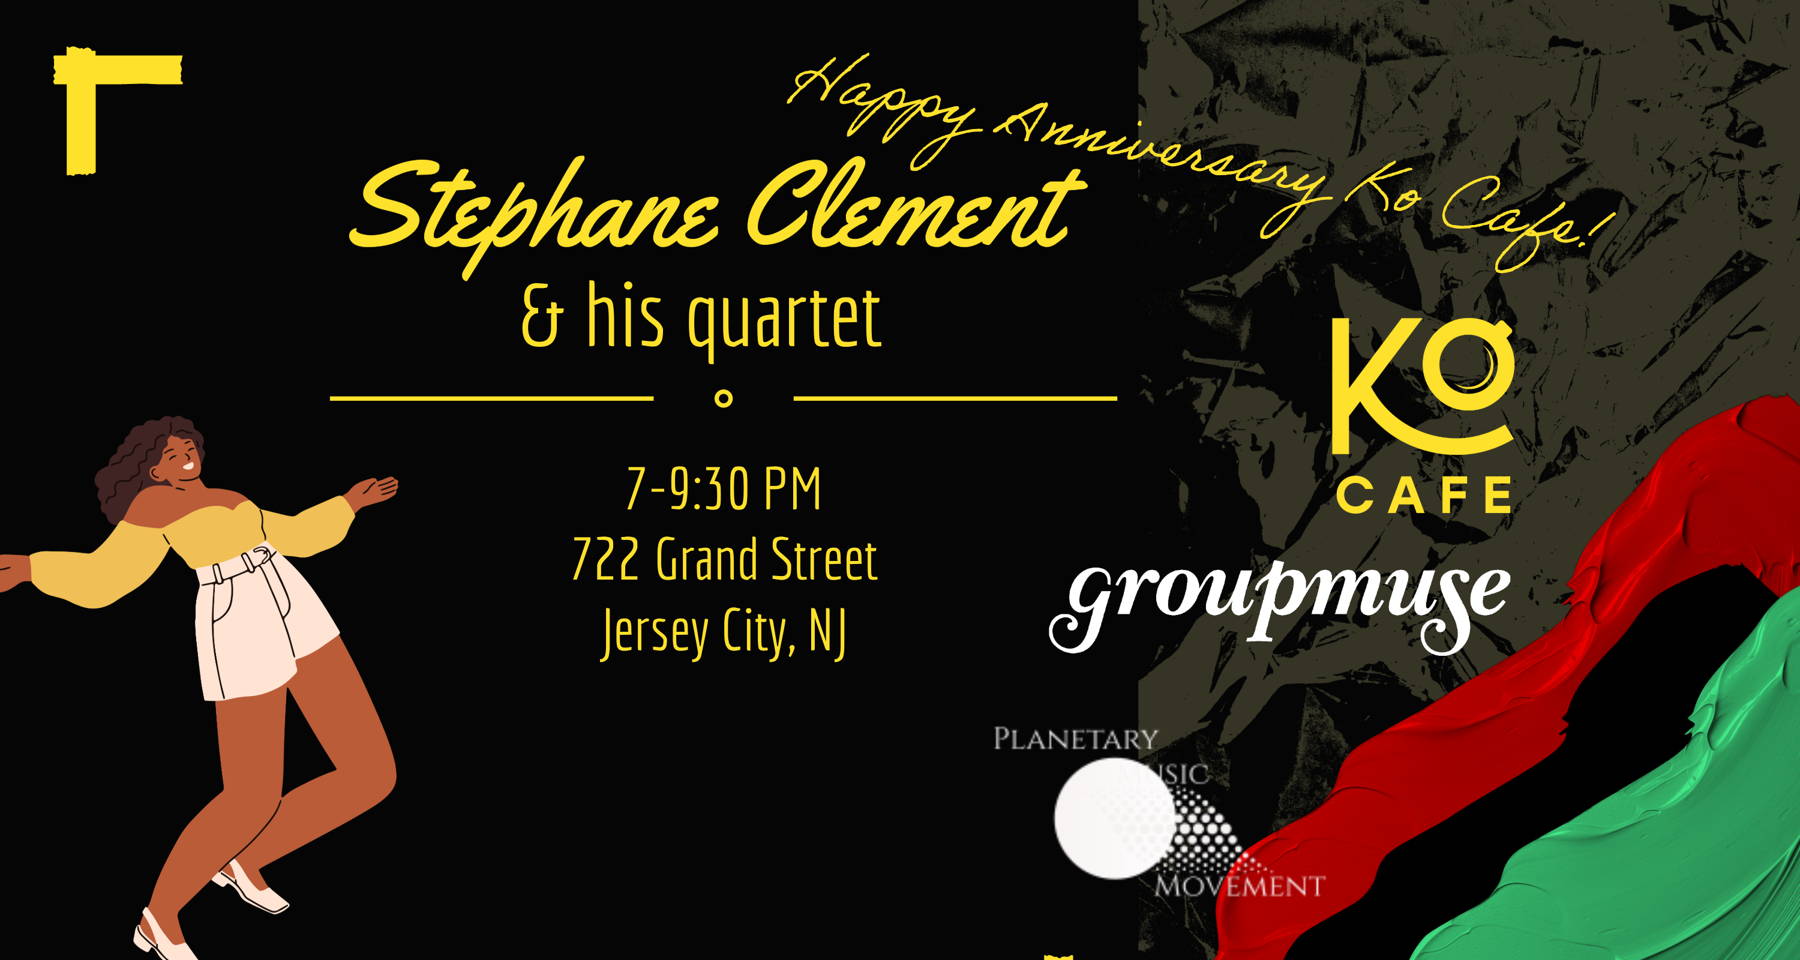 !!Now on Feb 29th!! Stephane Clement and his quartet at Kọ Cafe!